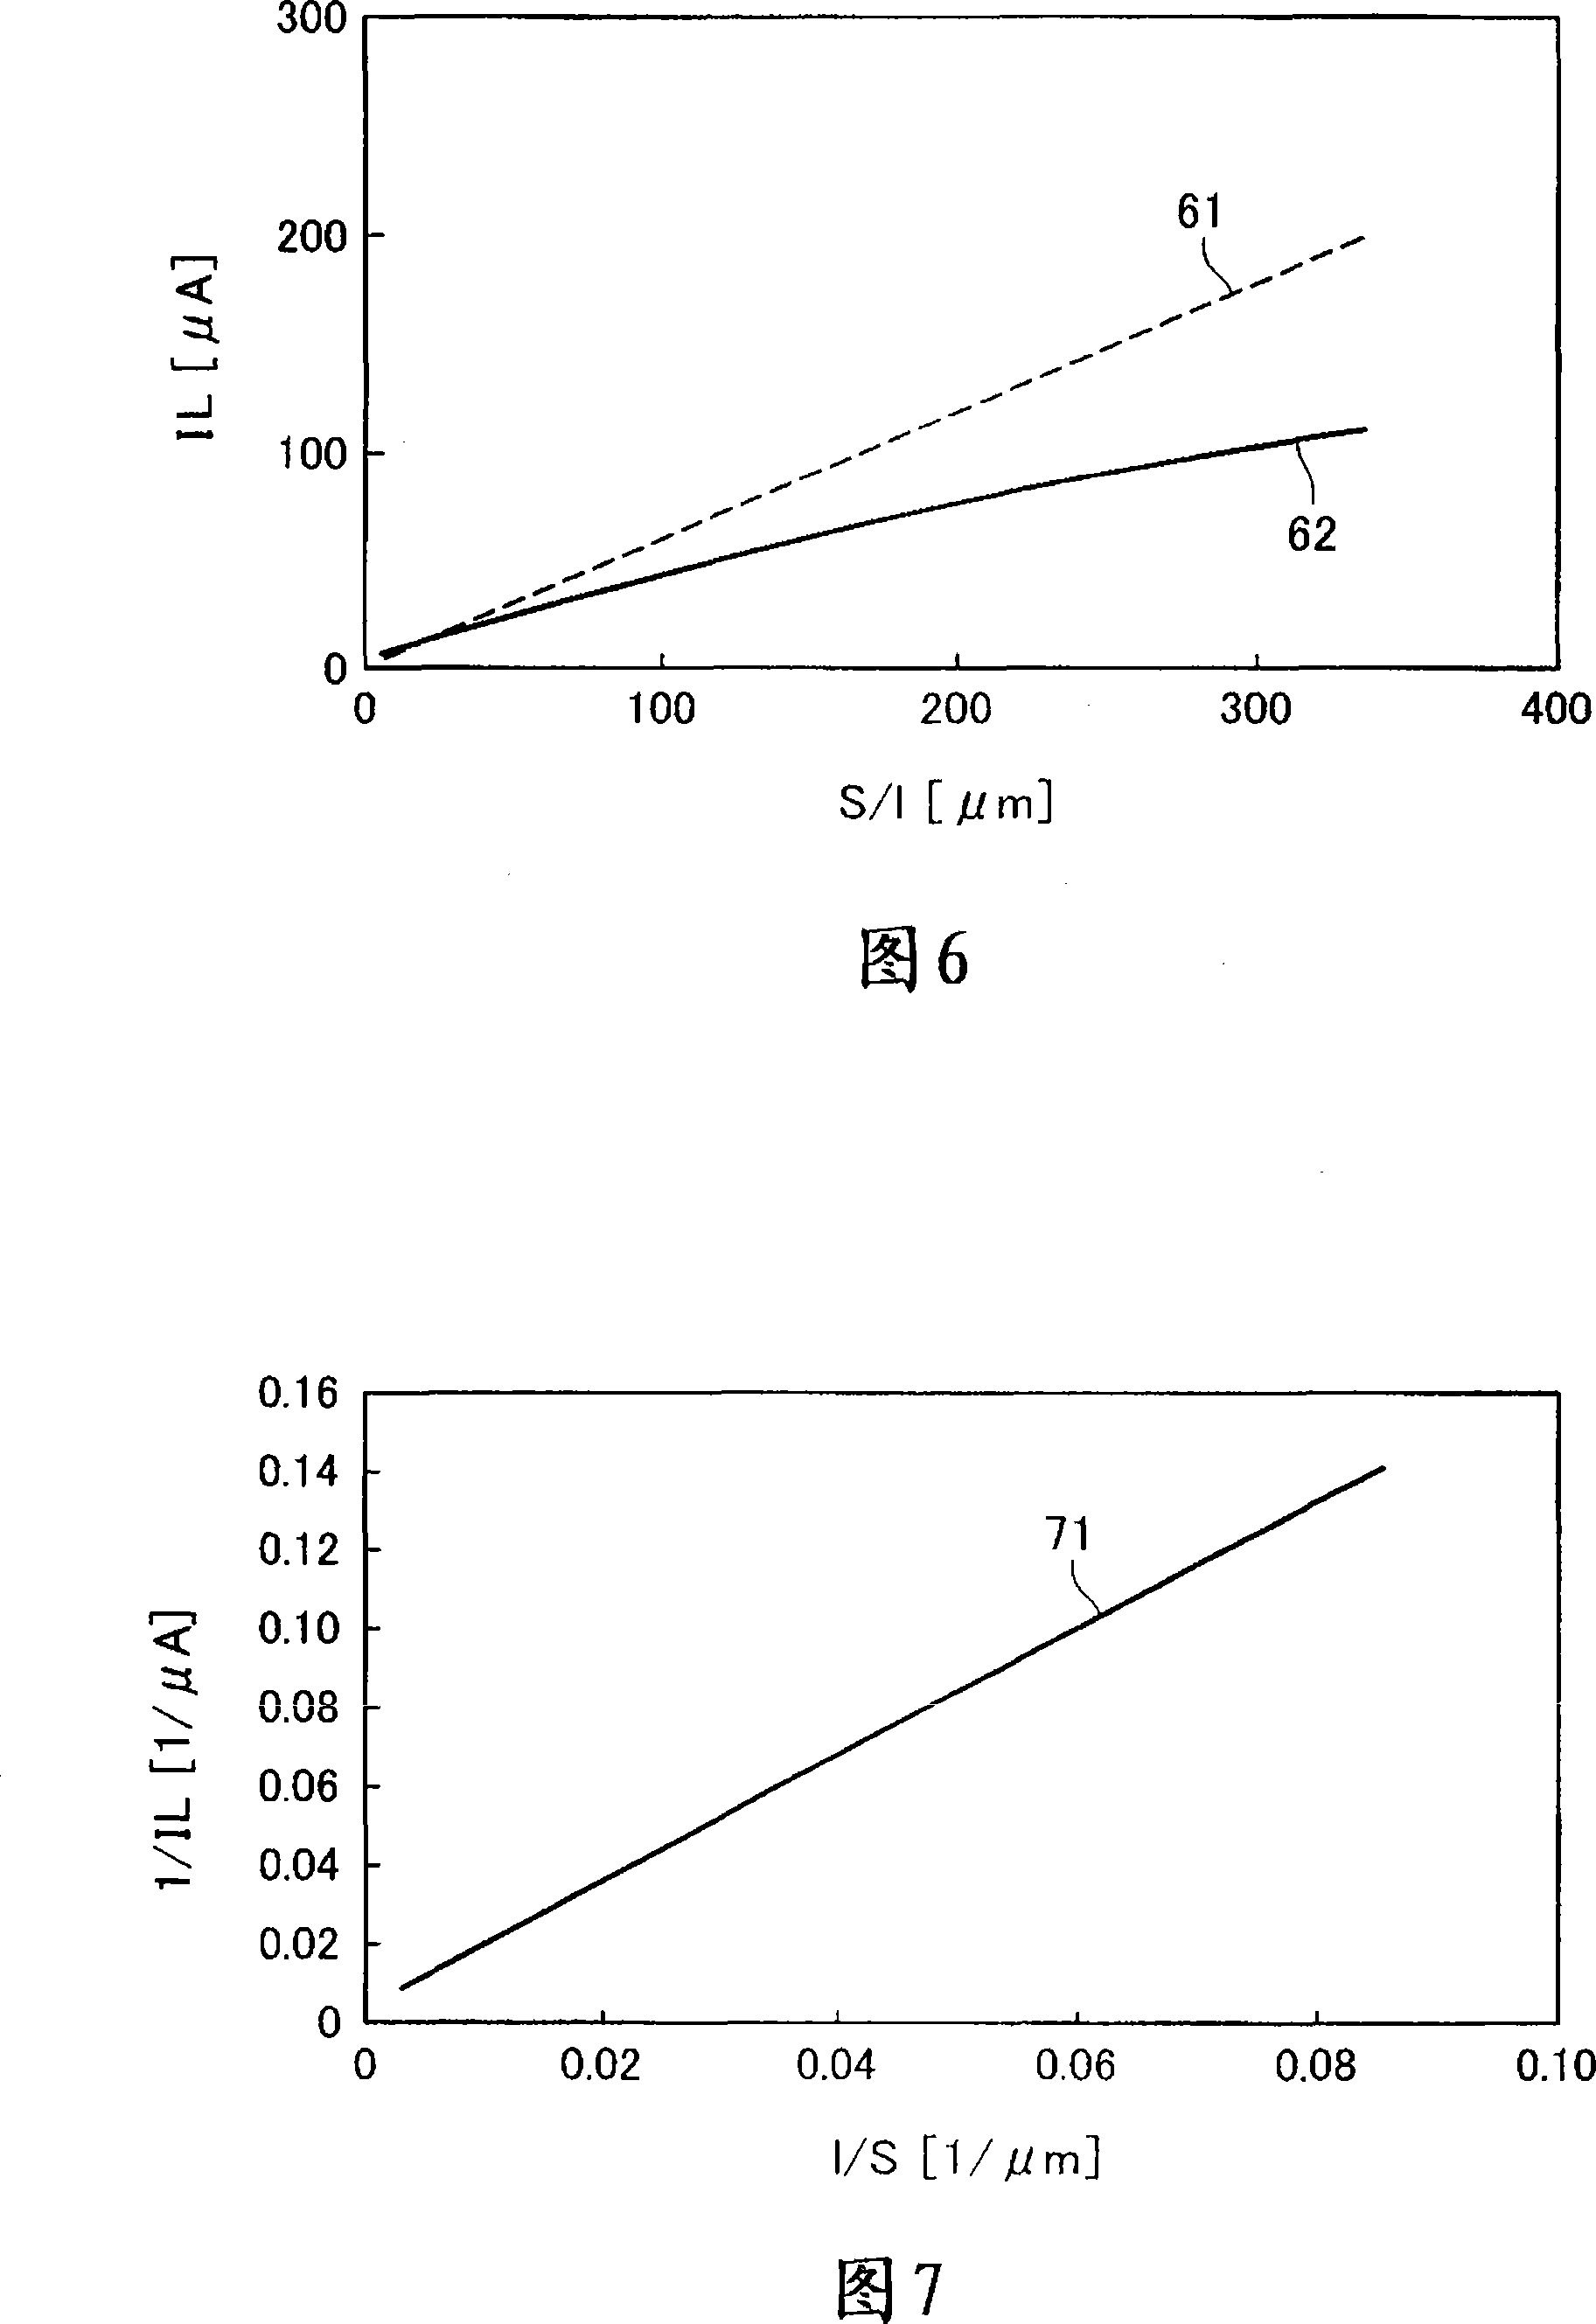 Limiting current type oxygen sensor and method of sensing and measuring oxygen concentrations using the same